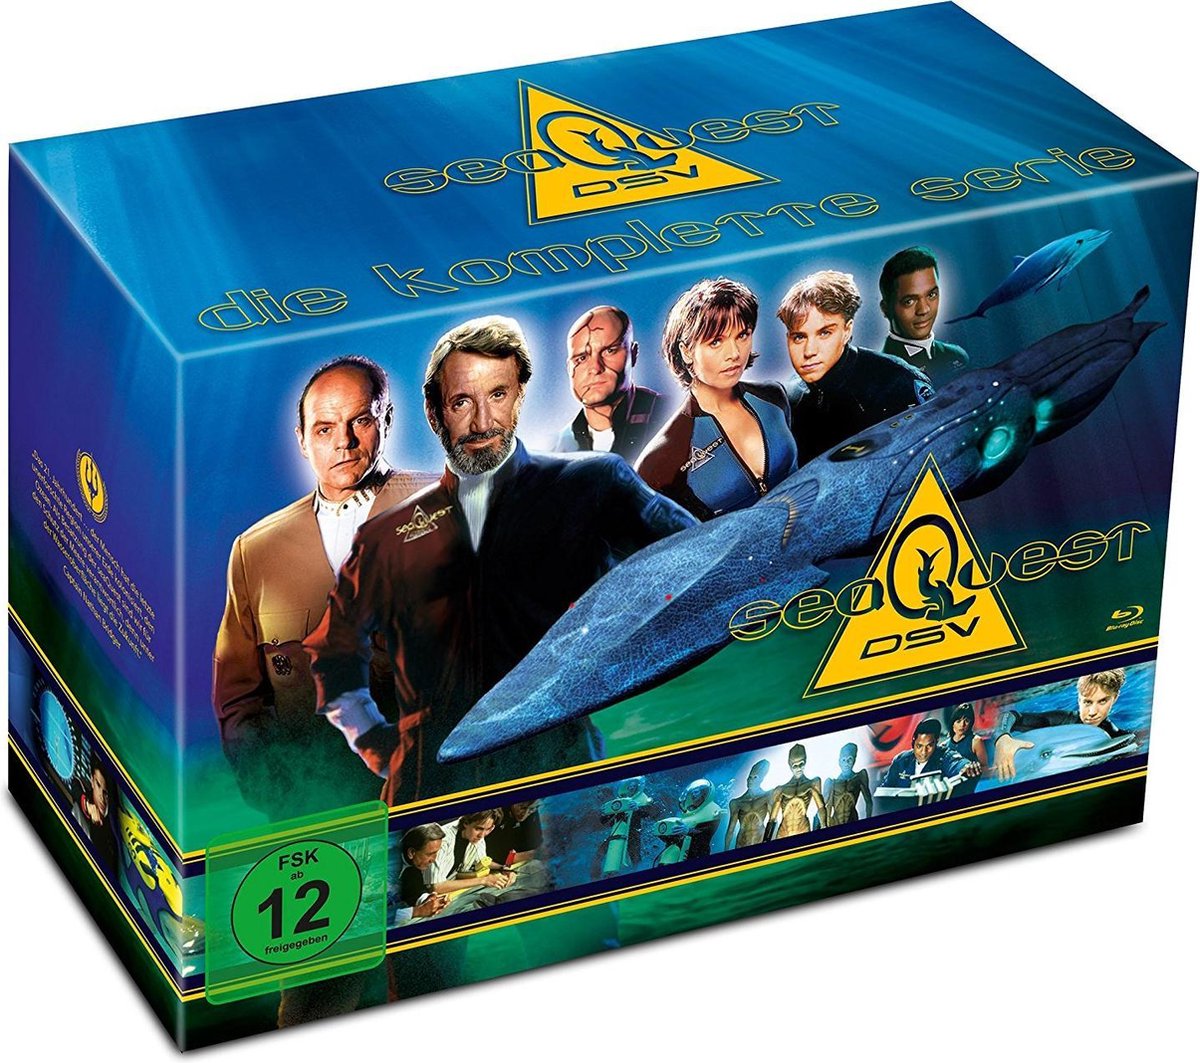 SeaQuest DSV Complete collection BLU-RAY - IMPORT